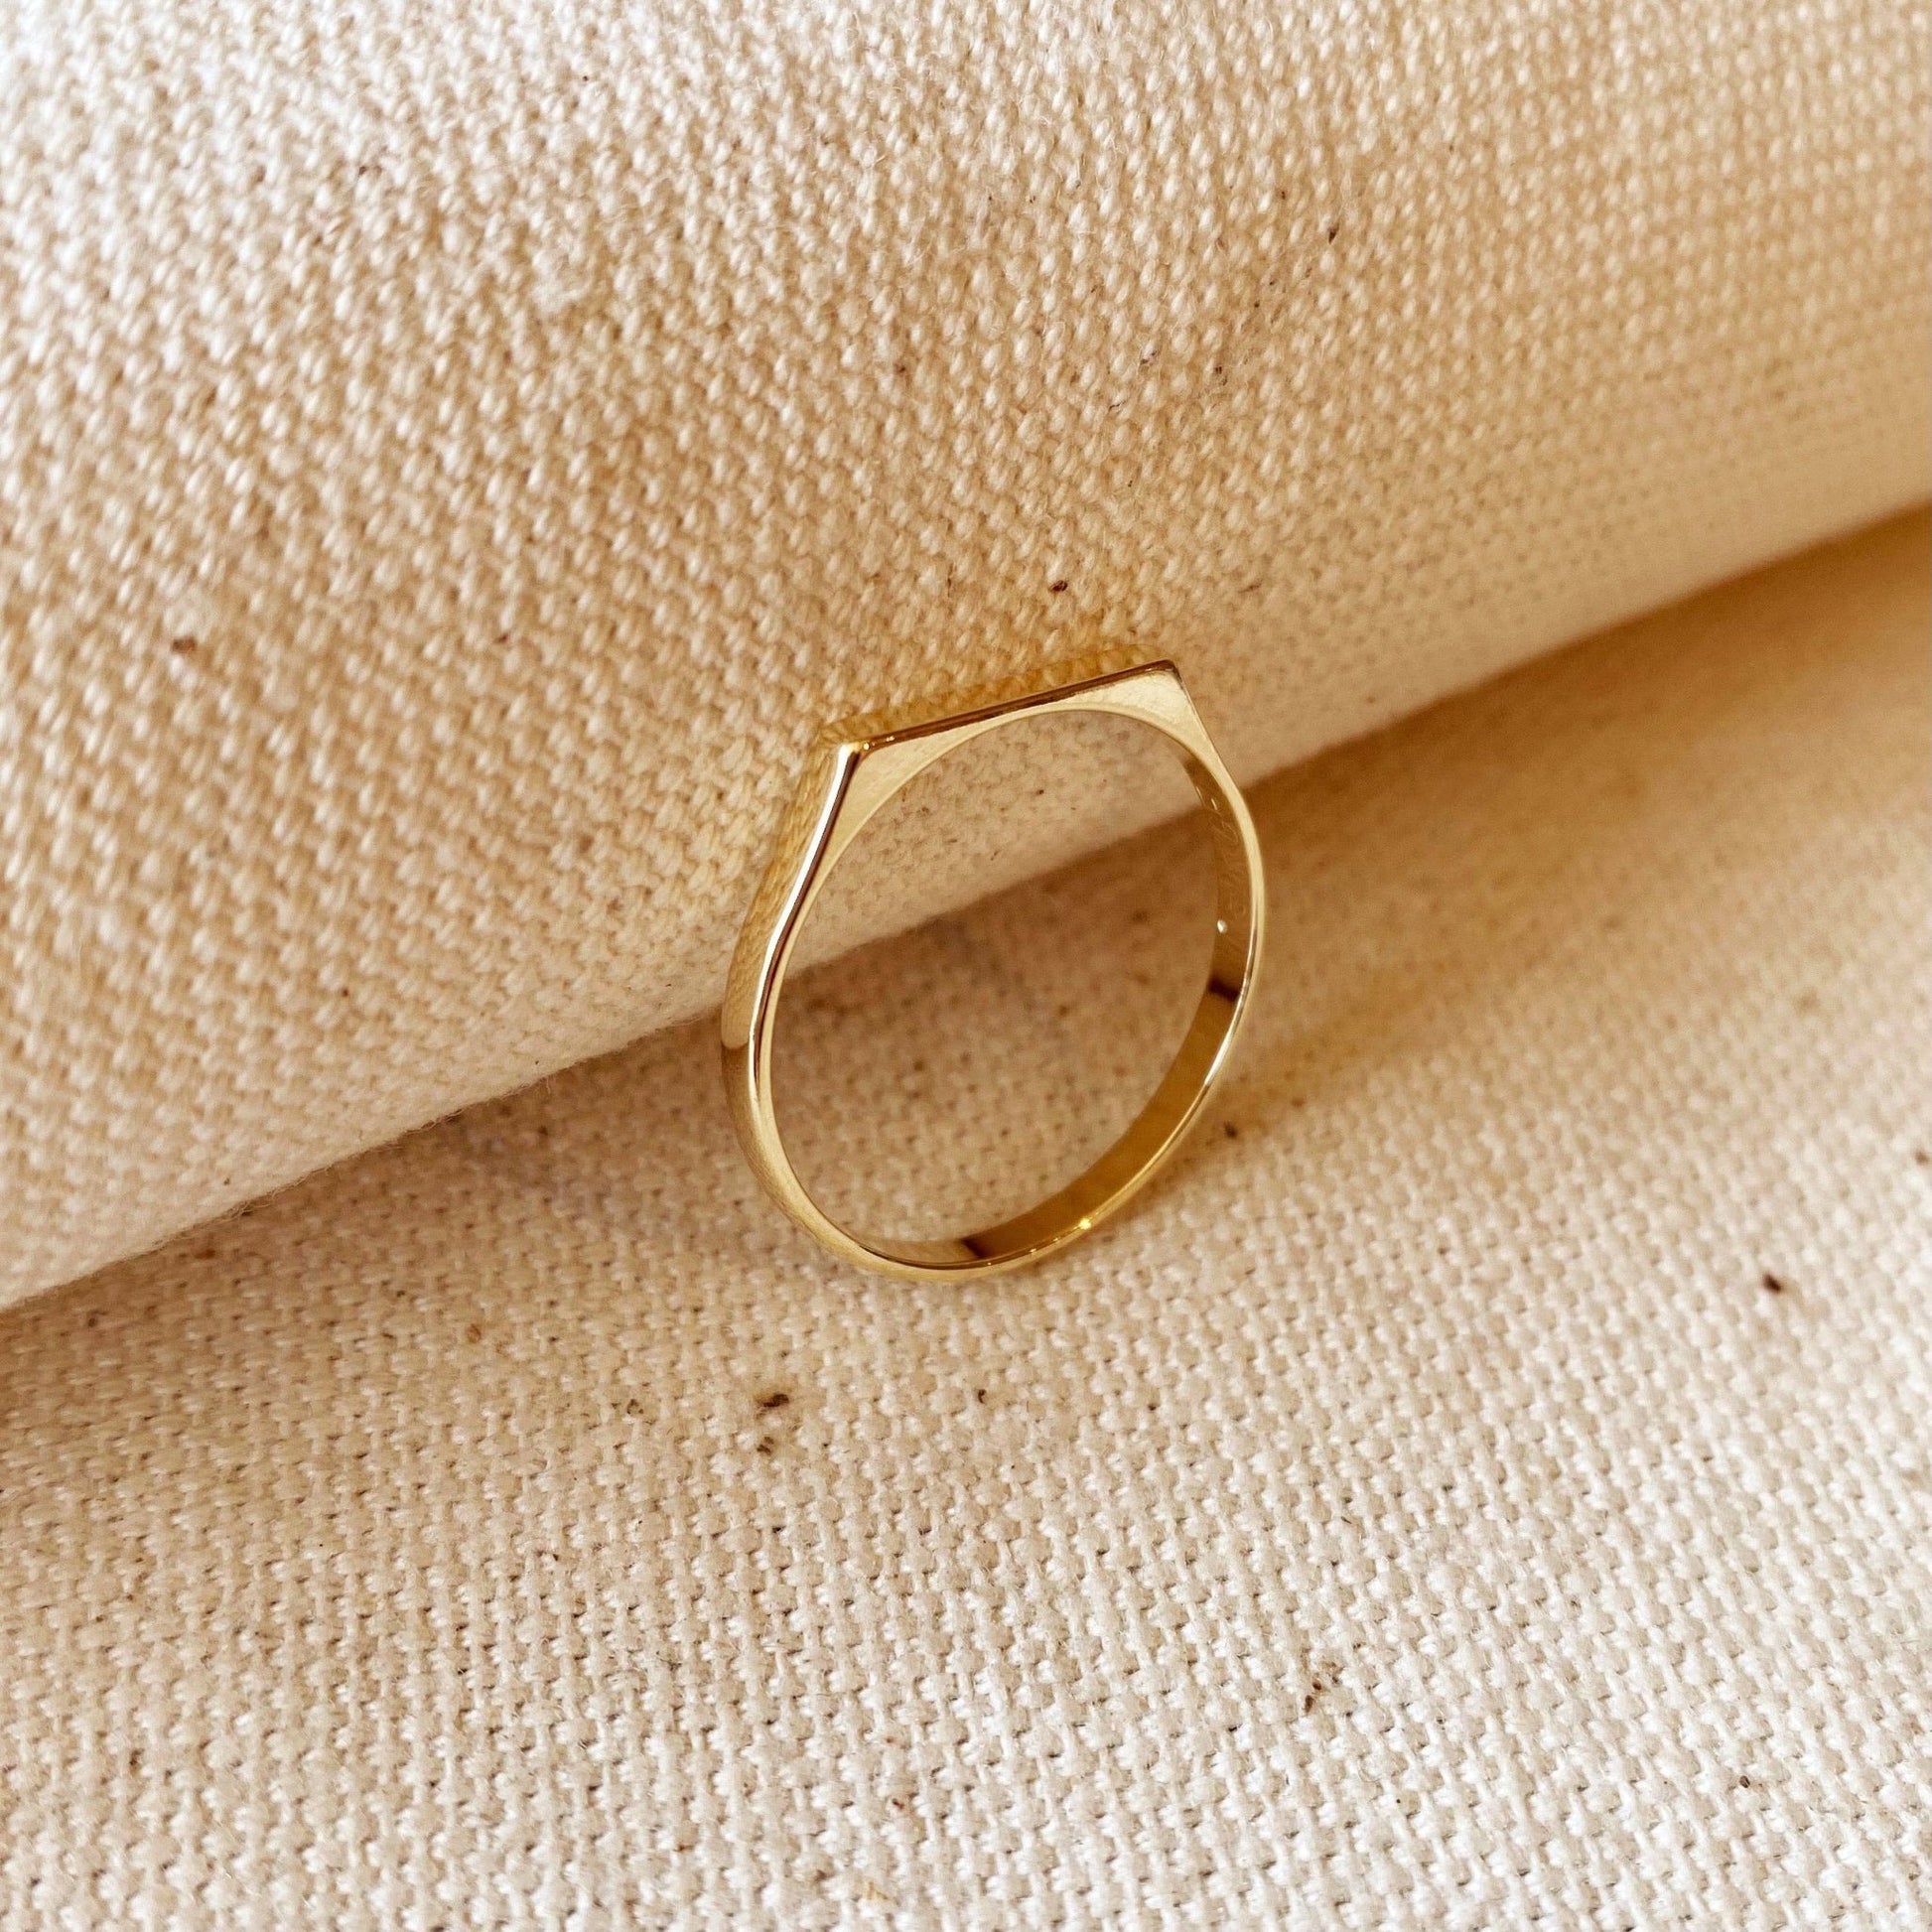 18k Gold Filled Flat Top Ring: 7 - FOREVERLINKX